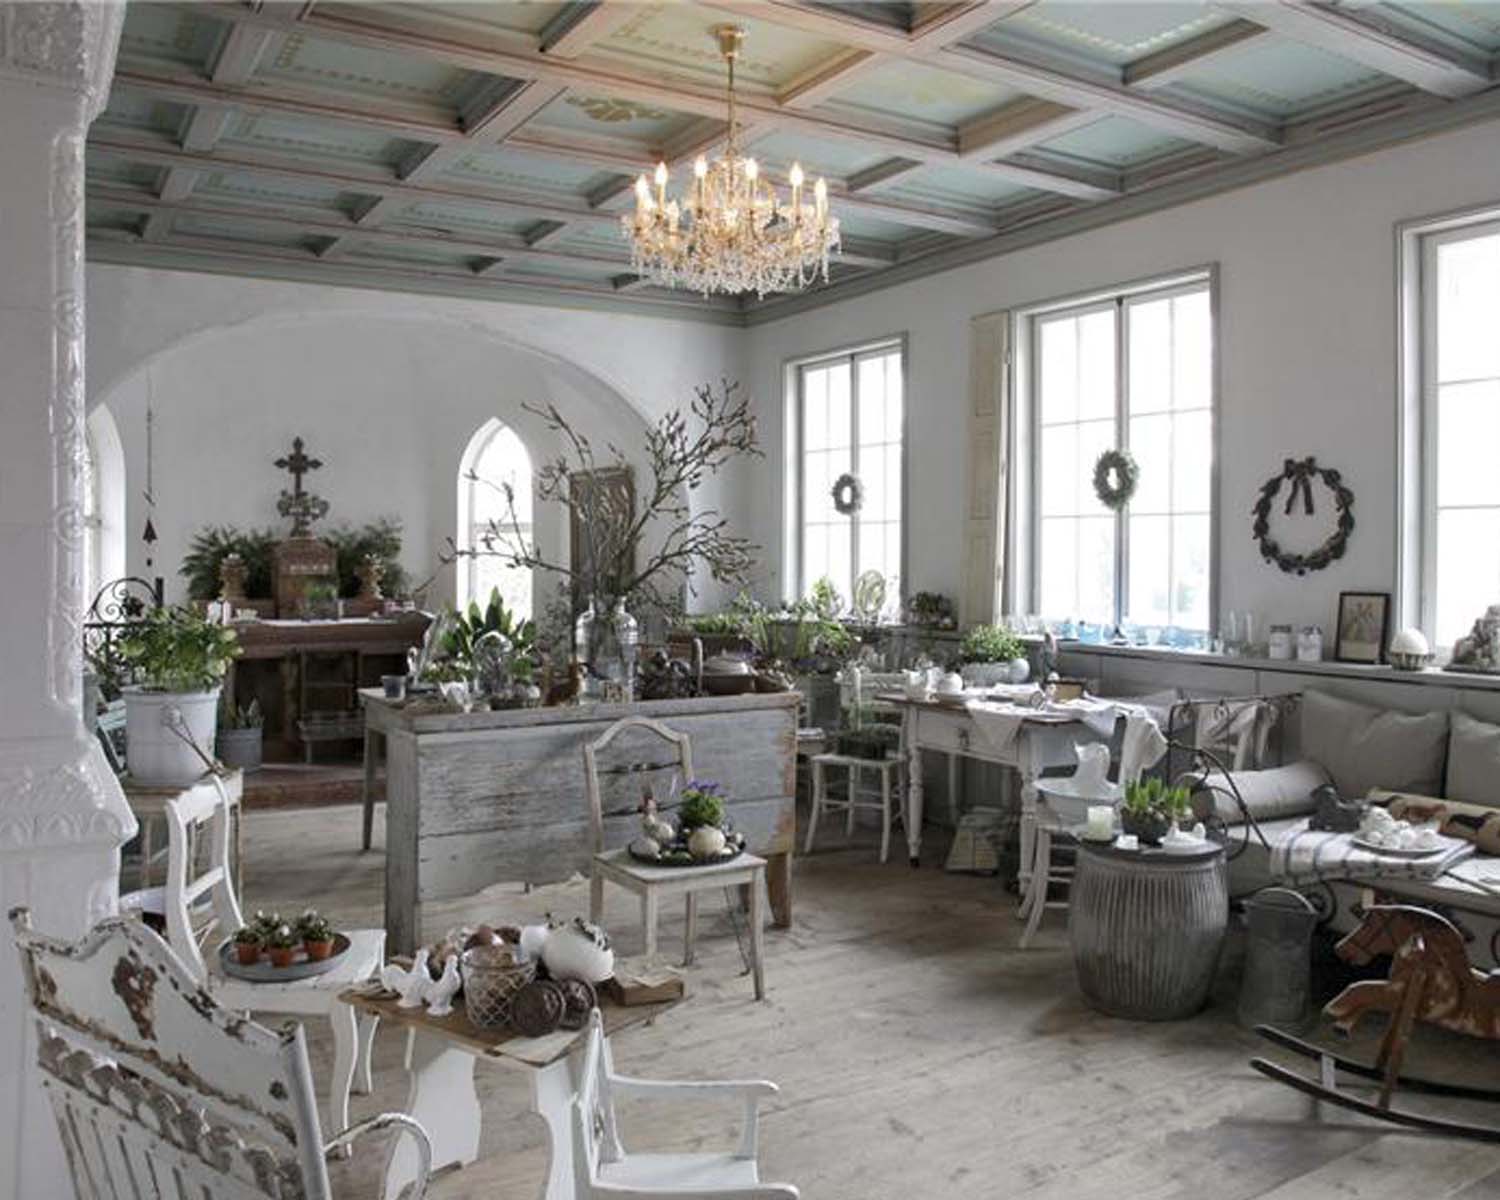 Green living room in shabby chic.  Source: decoholic.org